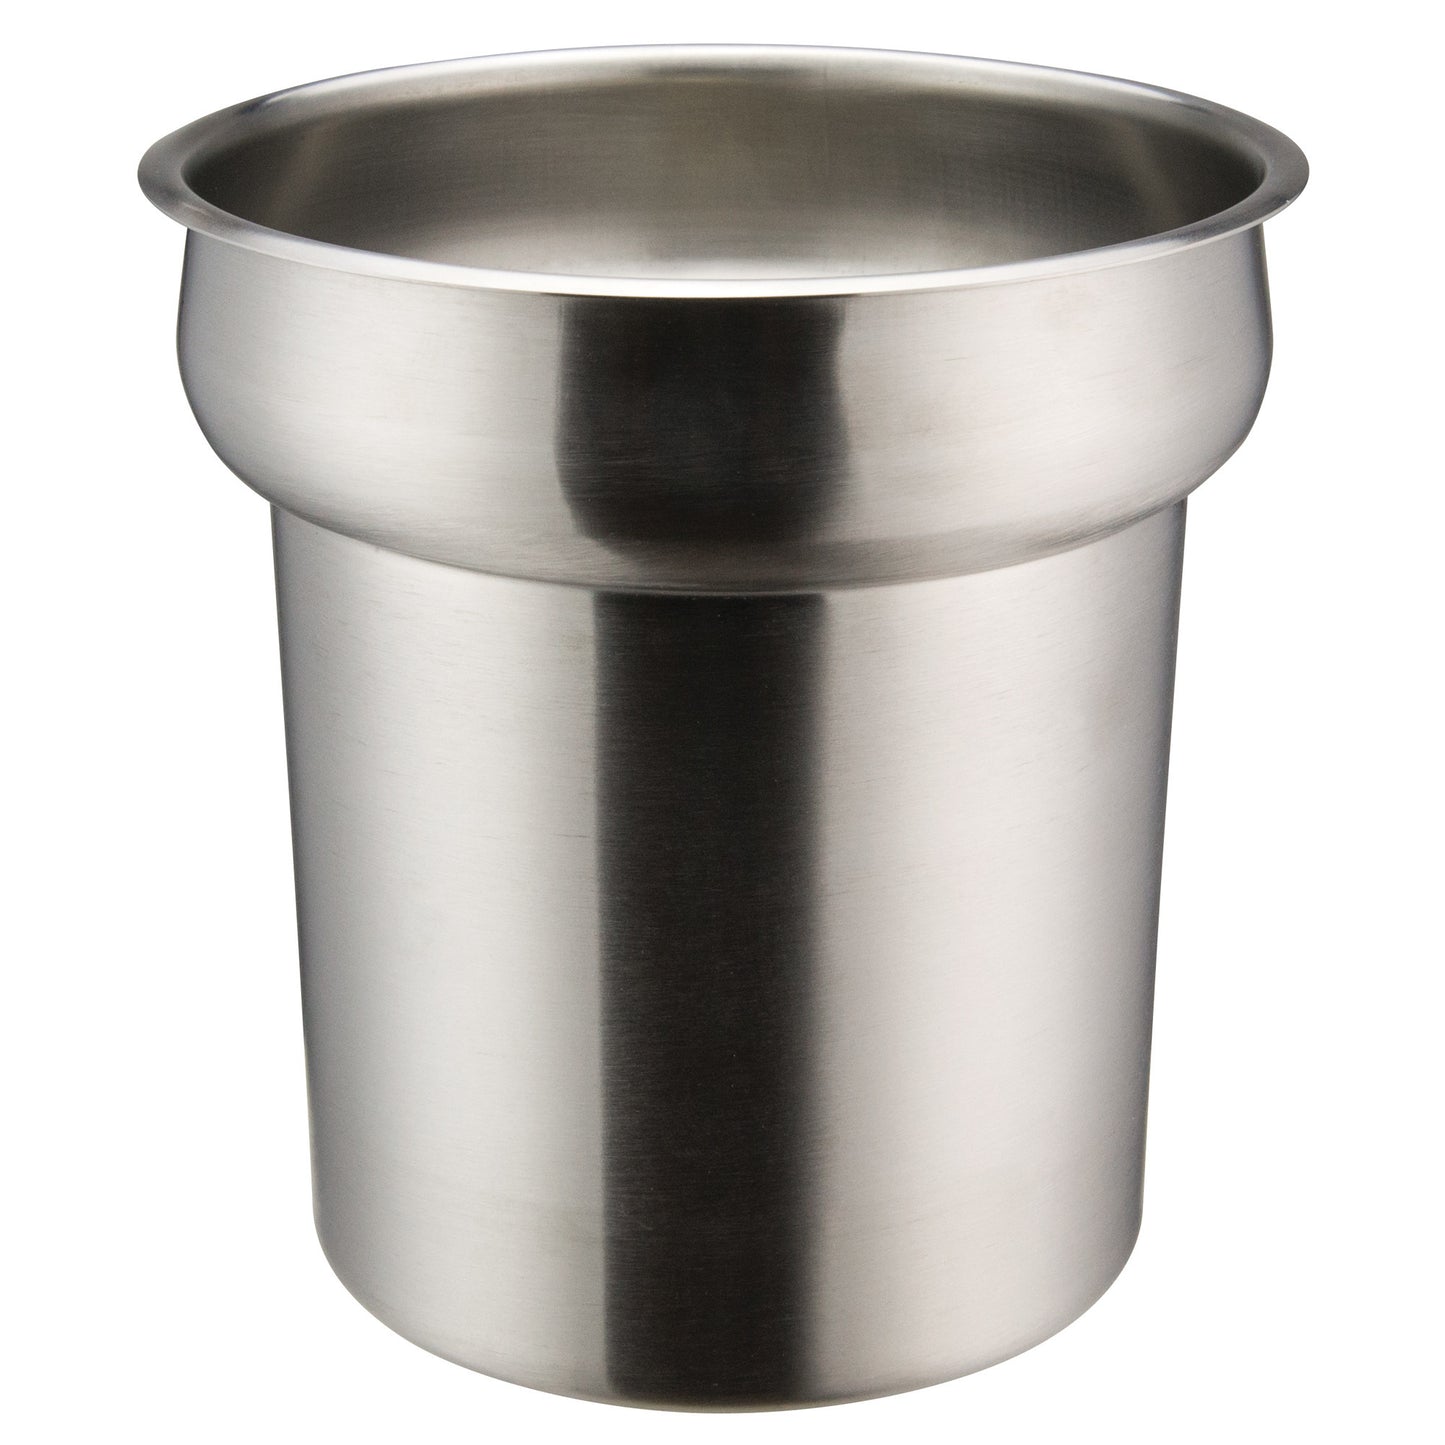 INSN-4 - Winco Prime Stainless Steel Inset - 4 Quart